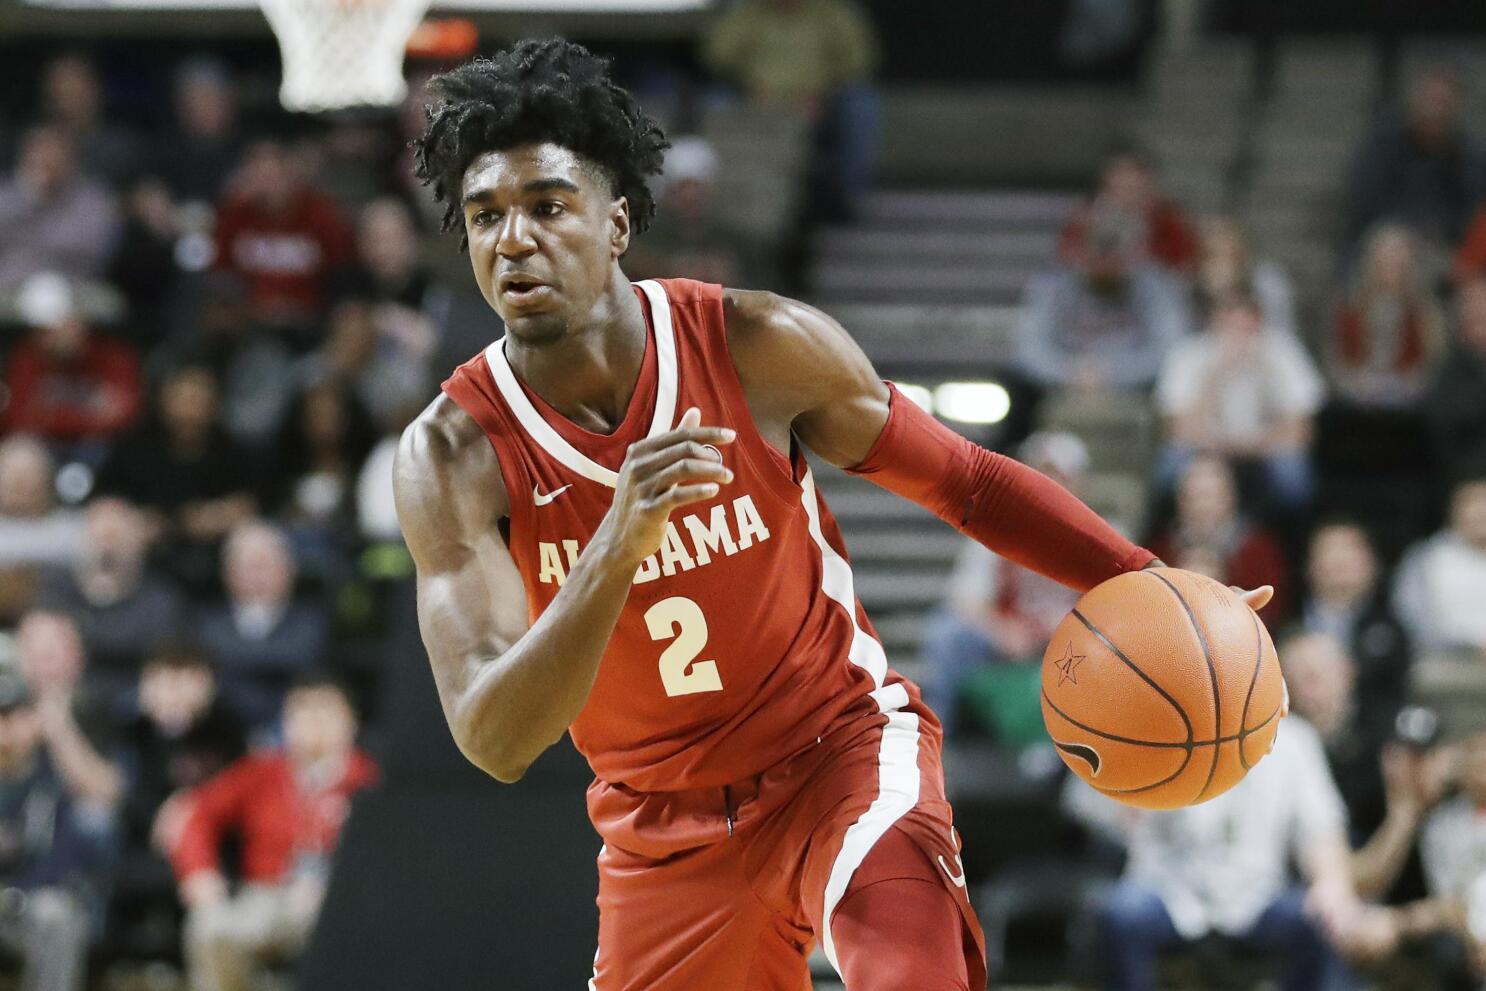 First look at Kira Lewis Jr. in his - New Orleans Pelicans